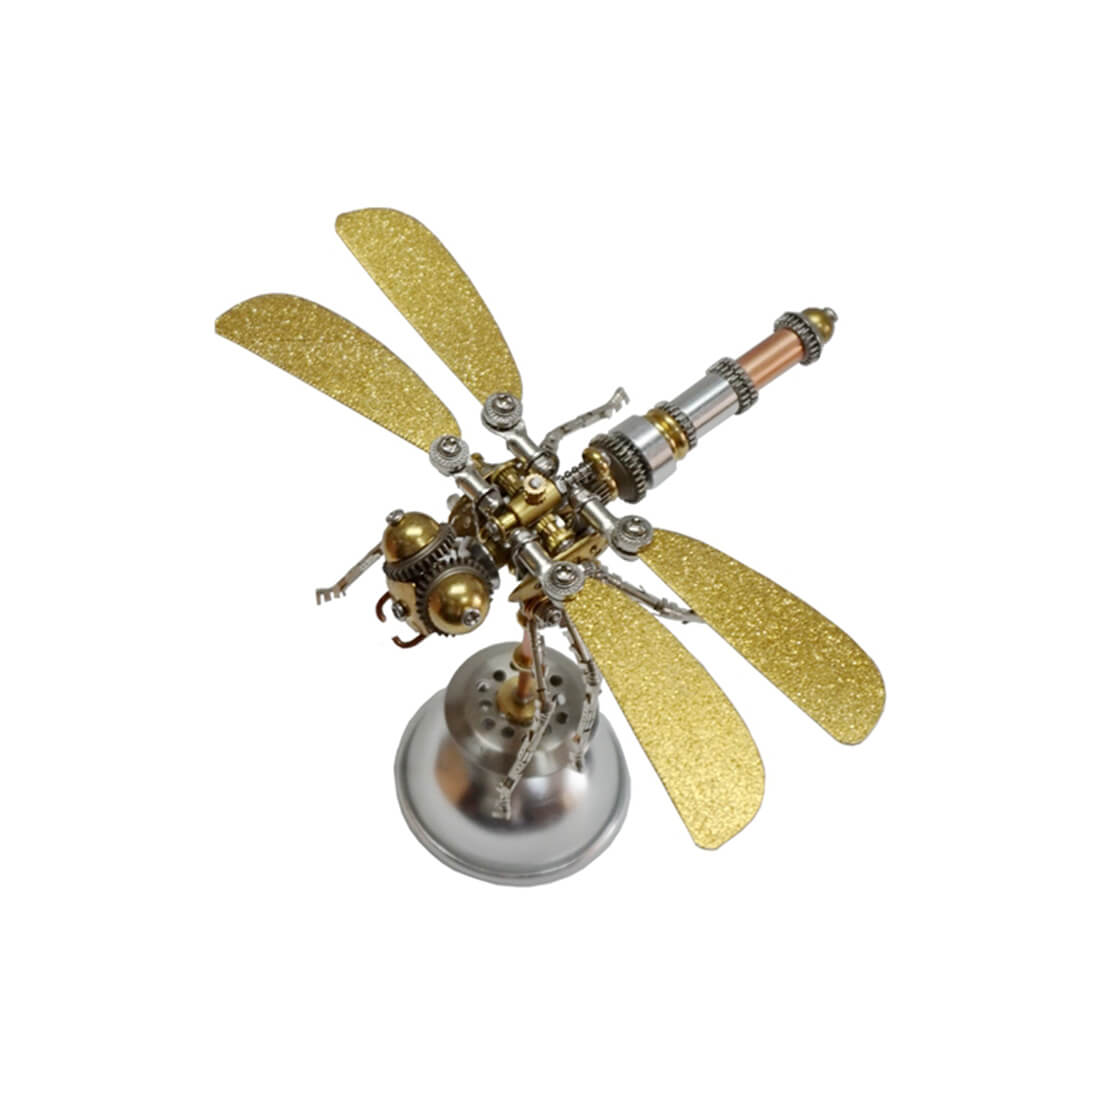 3d-diy-dragonfly-steampunk-mechanical-insect-metal-assembly-model-kit-kit-version-208pcs